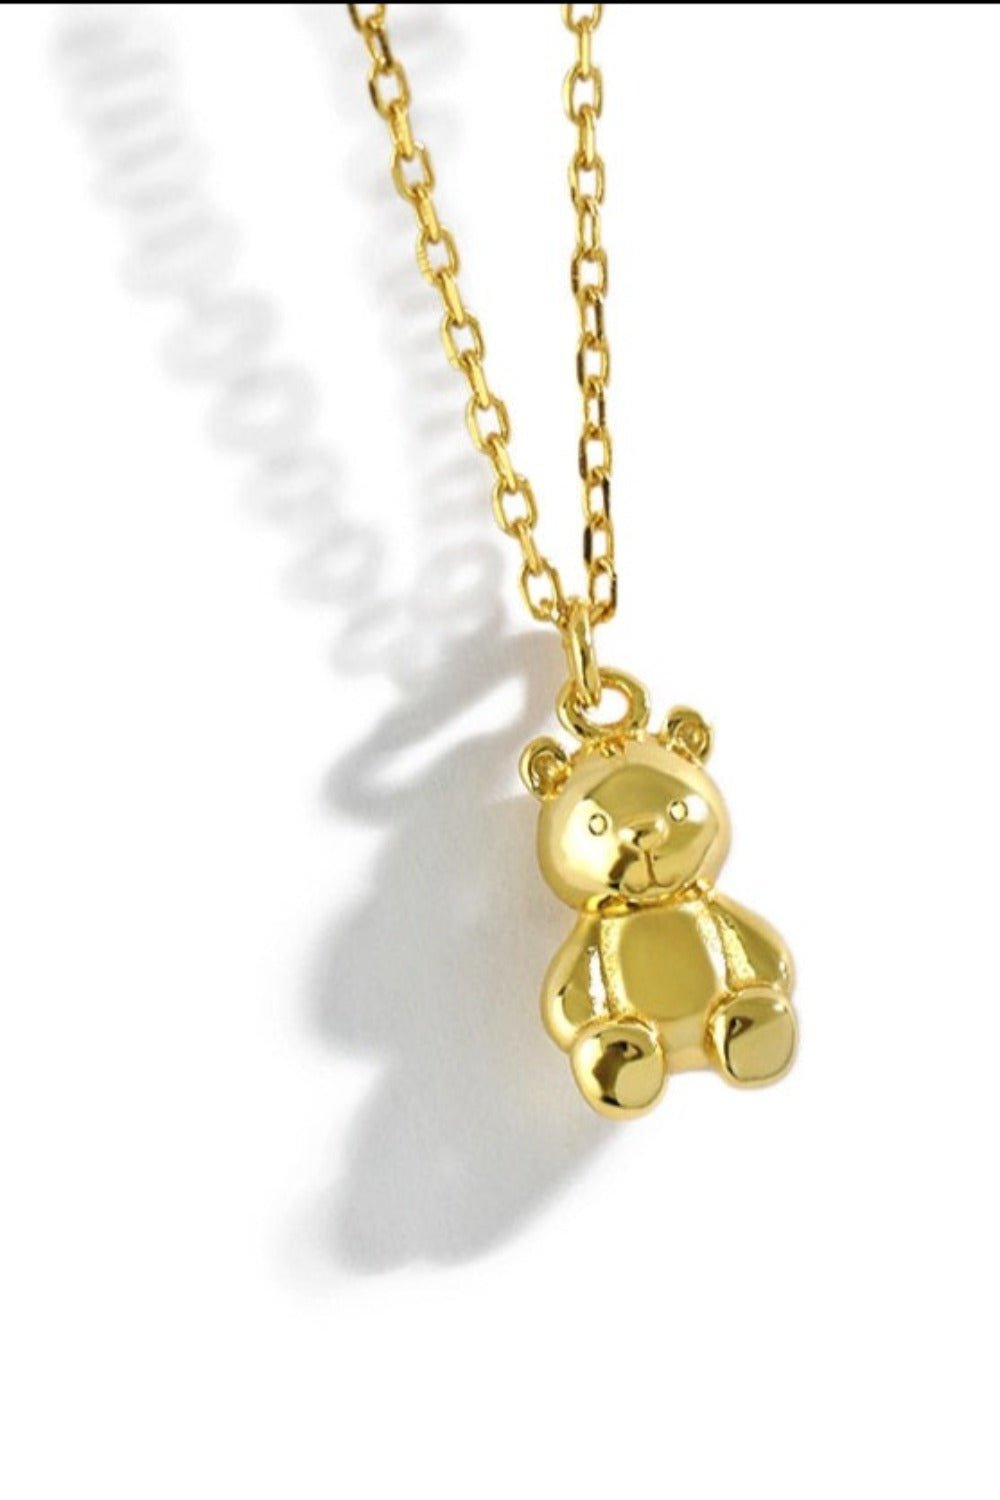 Buy Teddy Bear Necklace, Teddy Bear Jewelry, Initial, Birthstone, Monogram,  Gift for Her, Birthday Gift, Charm Necklace Online in India - Etsy